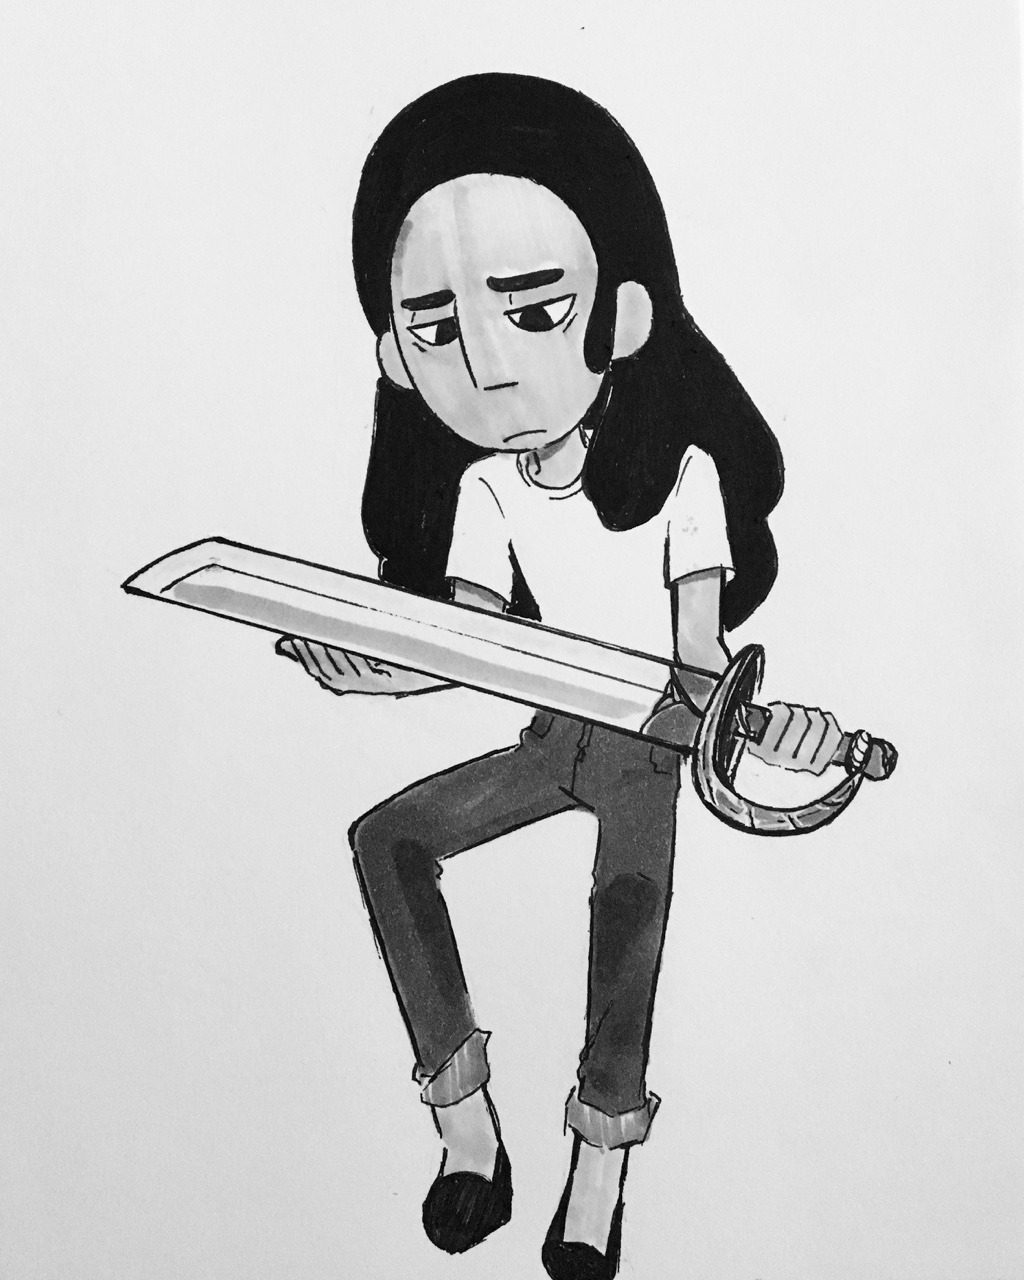 Inktober Day 6: Sword "But what about our training? Stevonnie, jam buds. I believed in us, we could of done it together!“